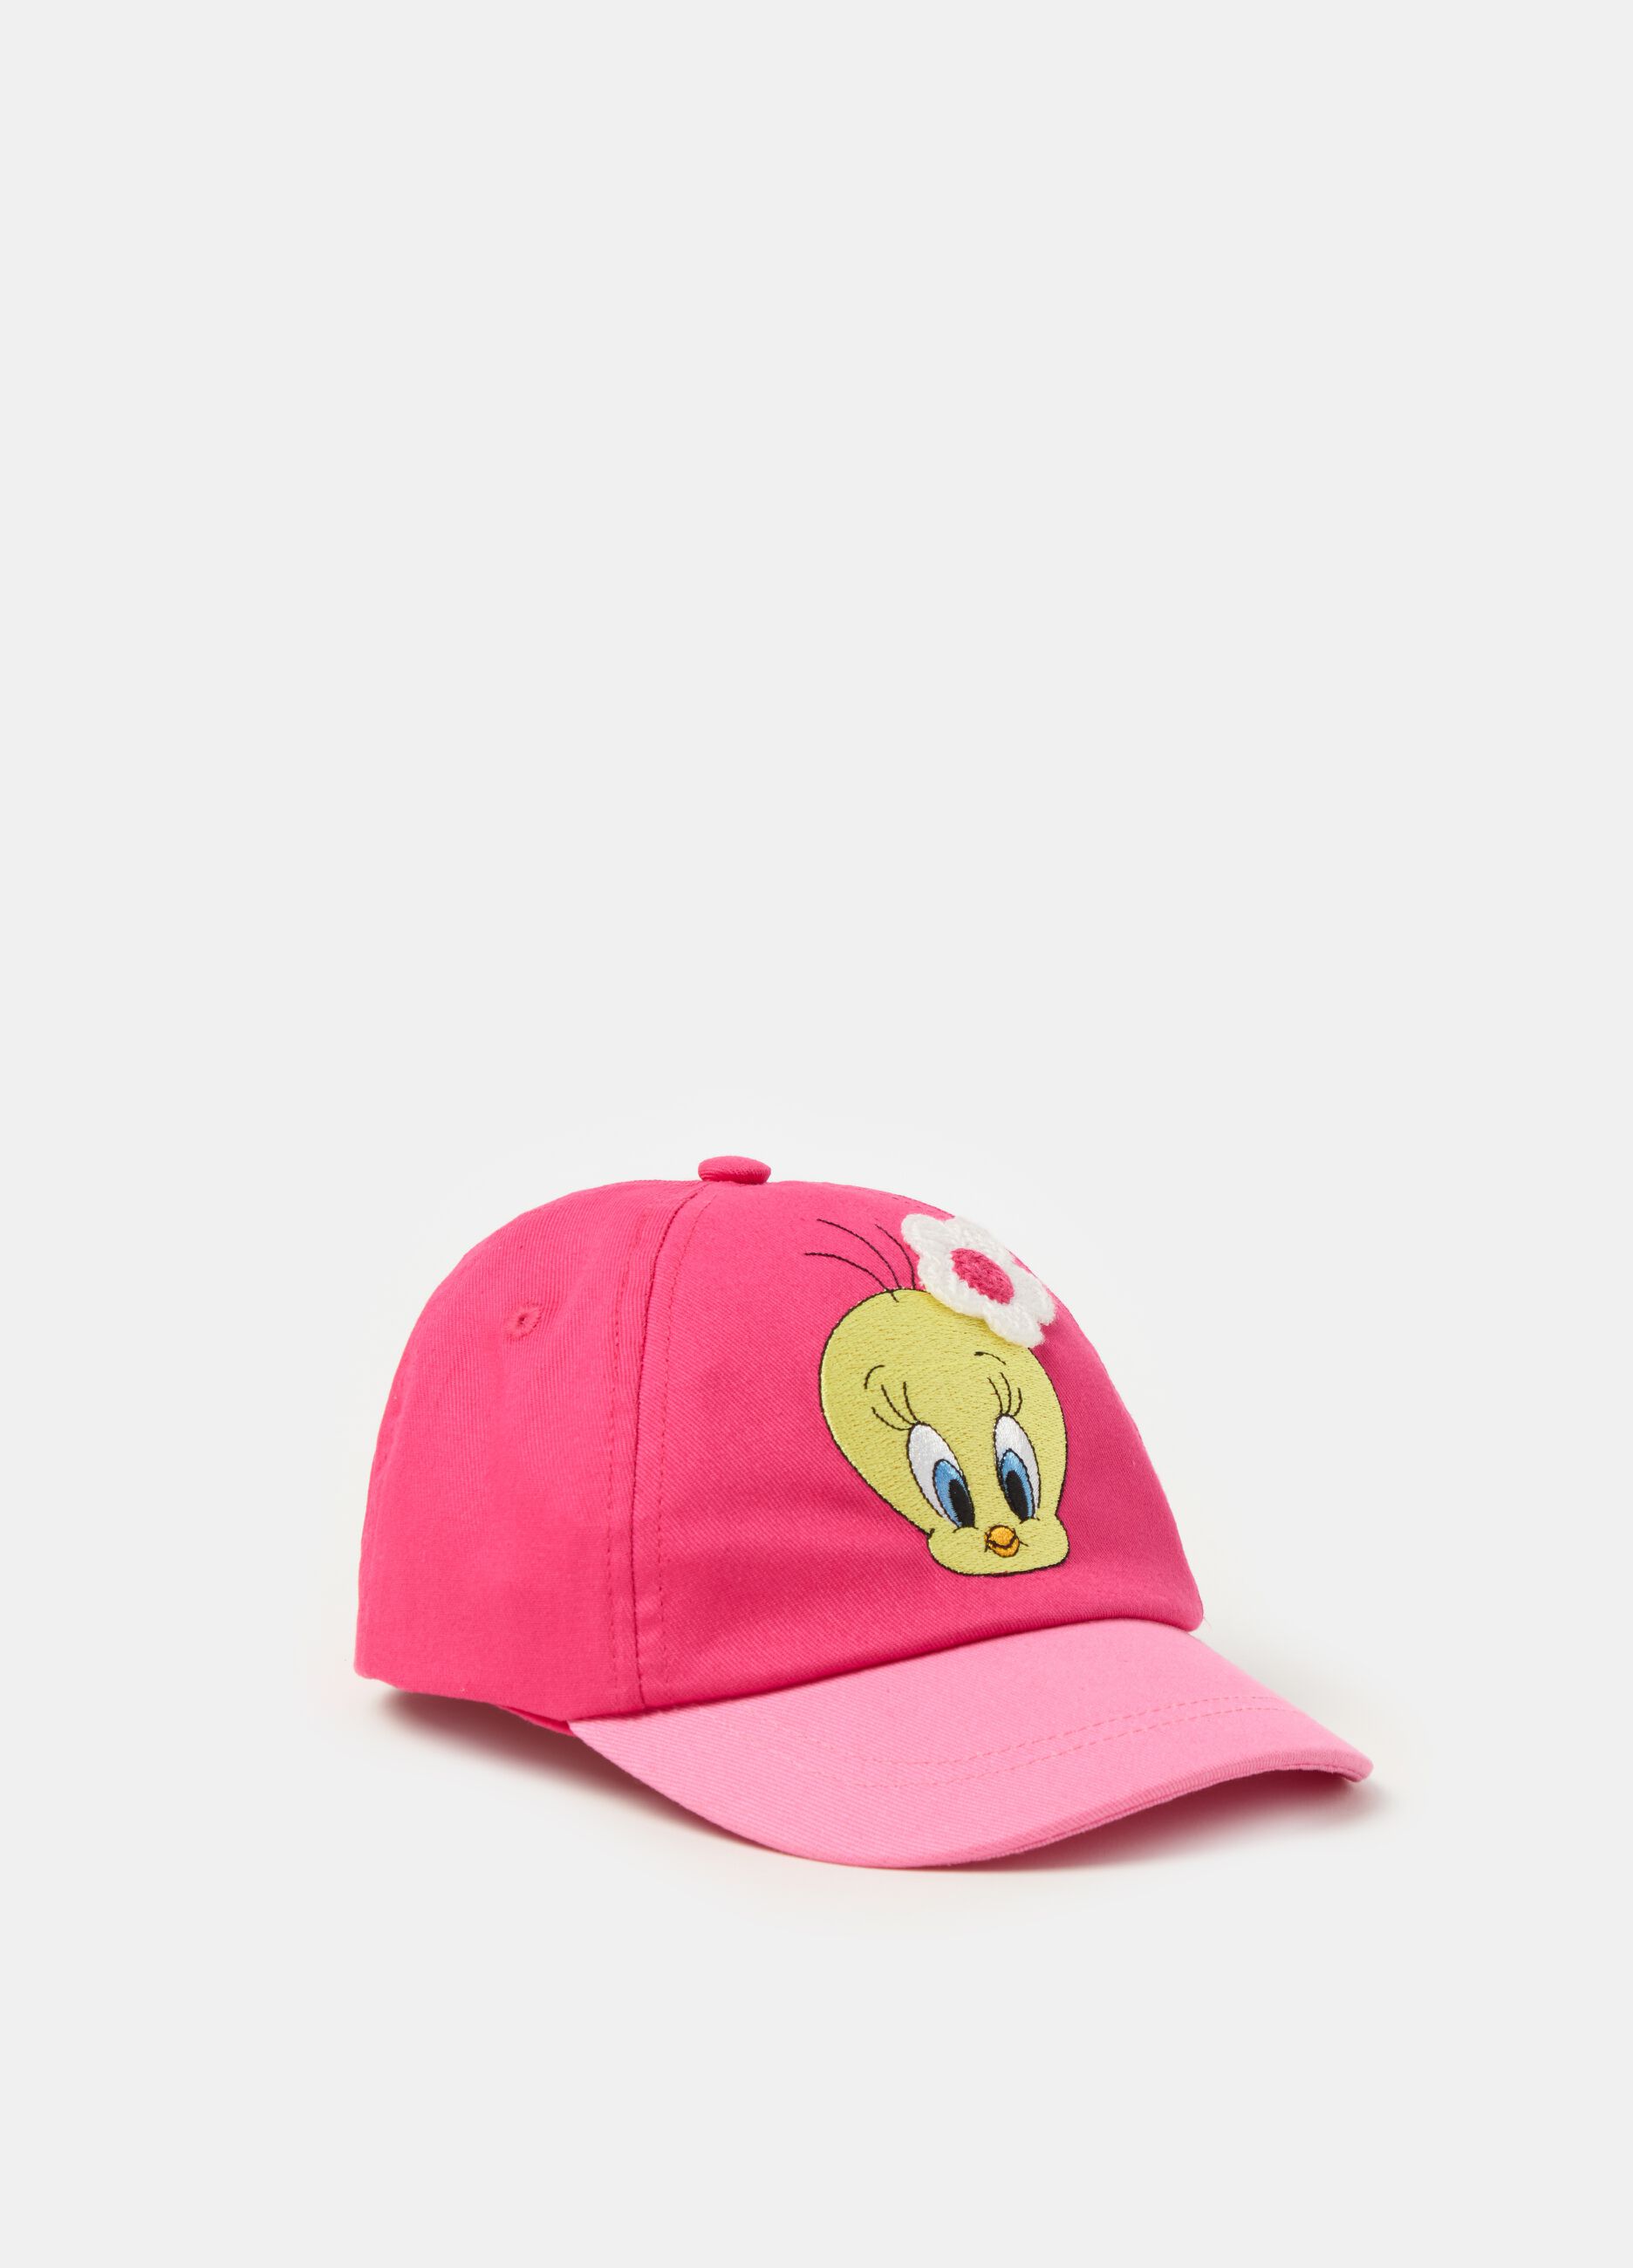 Baseball cap with Tweetie Pie embroidery